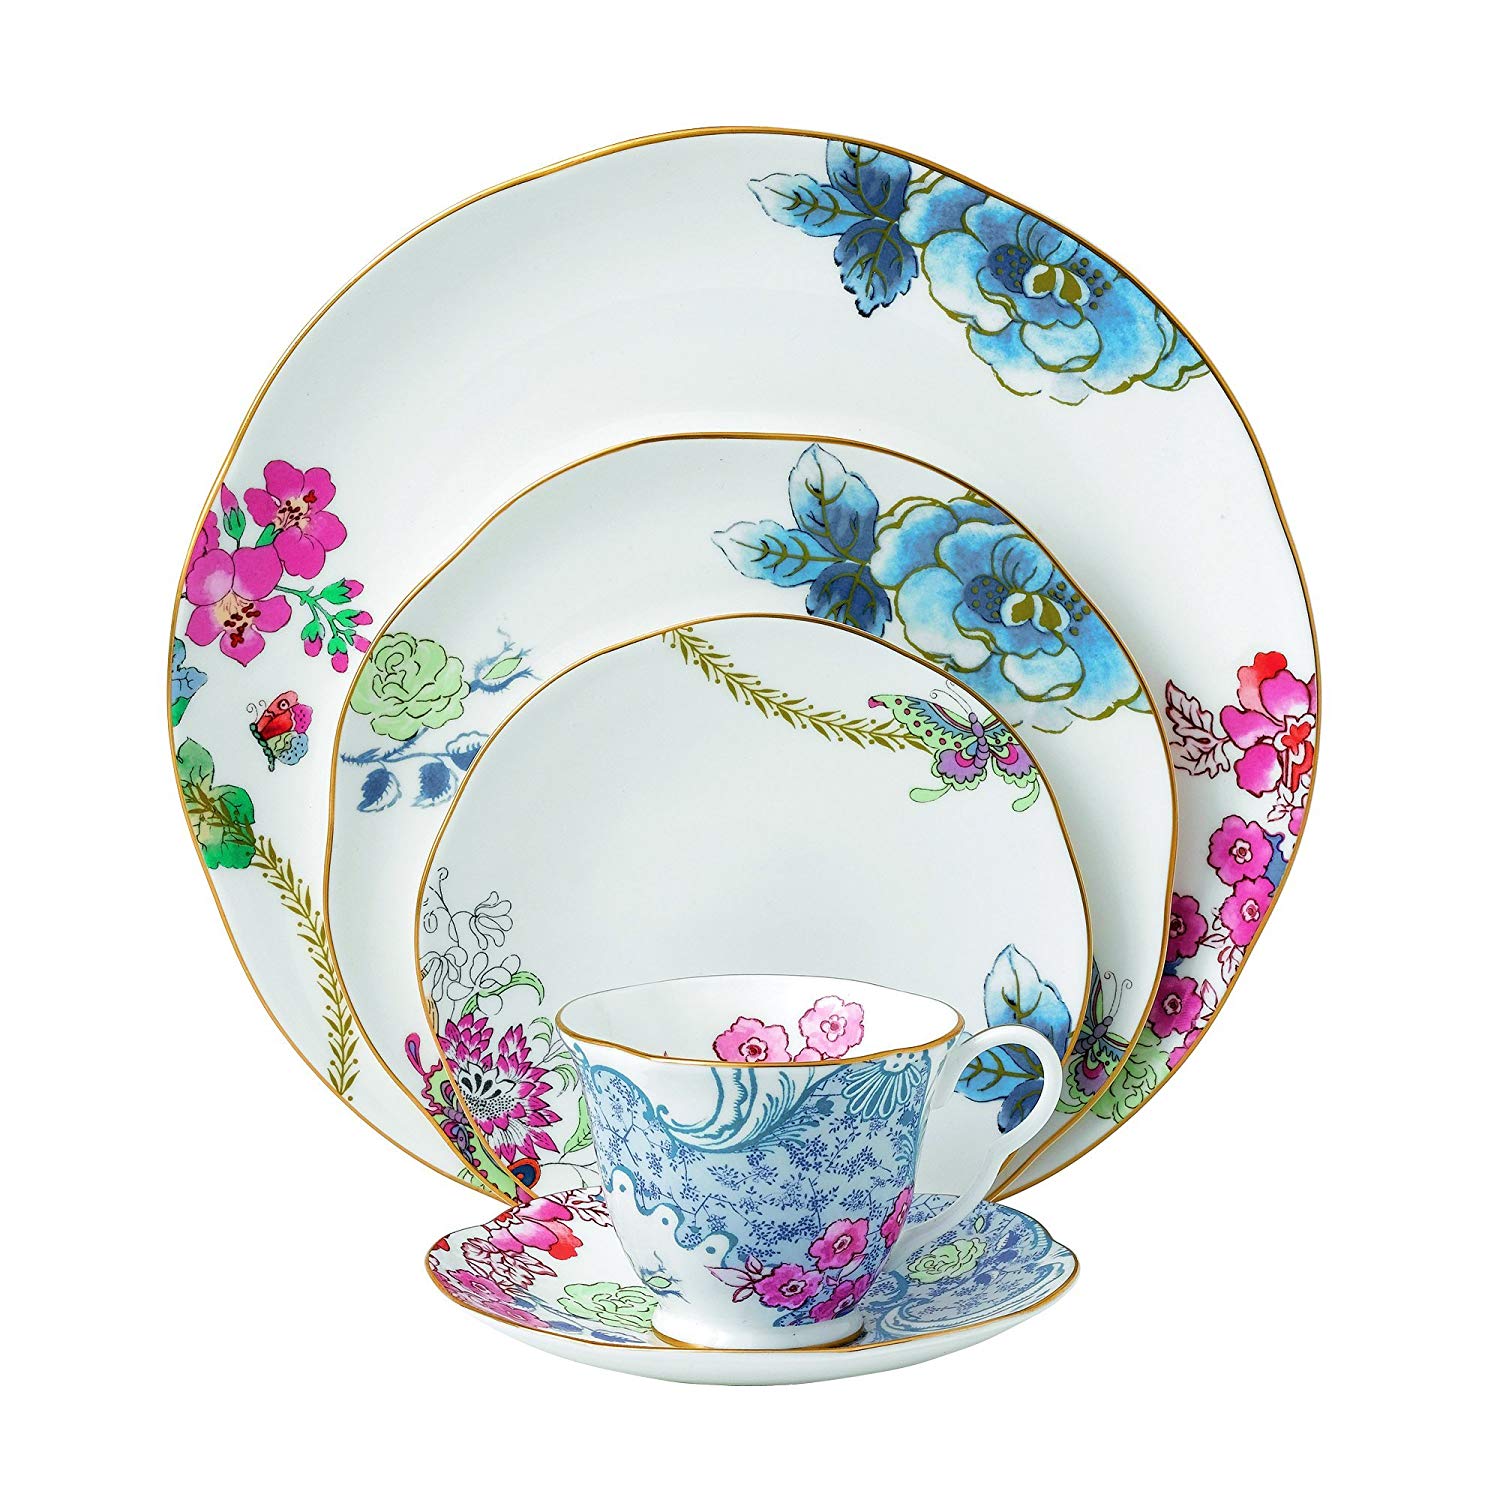 Wedgwood China Butterfly Bloom, 5 Piece Place Setting